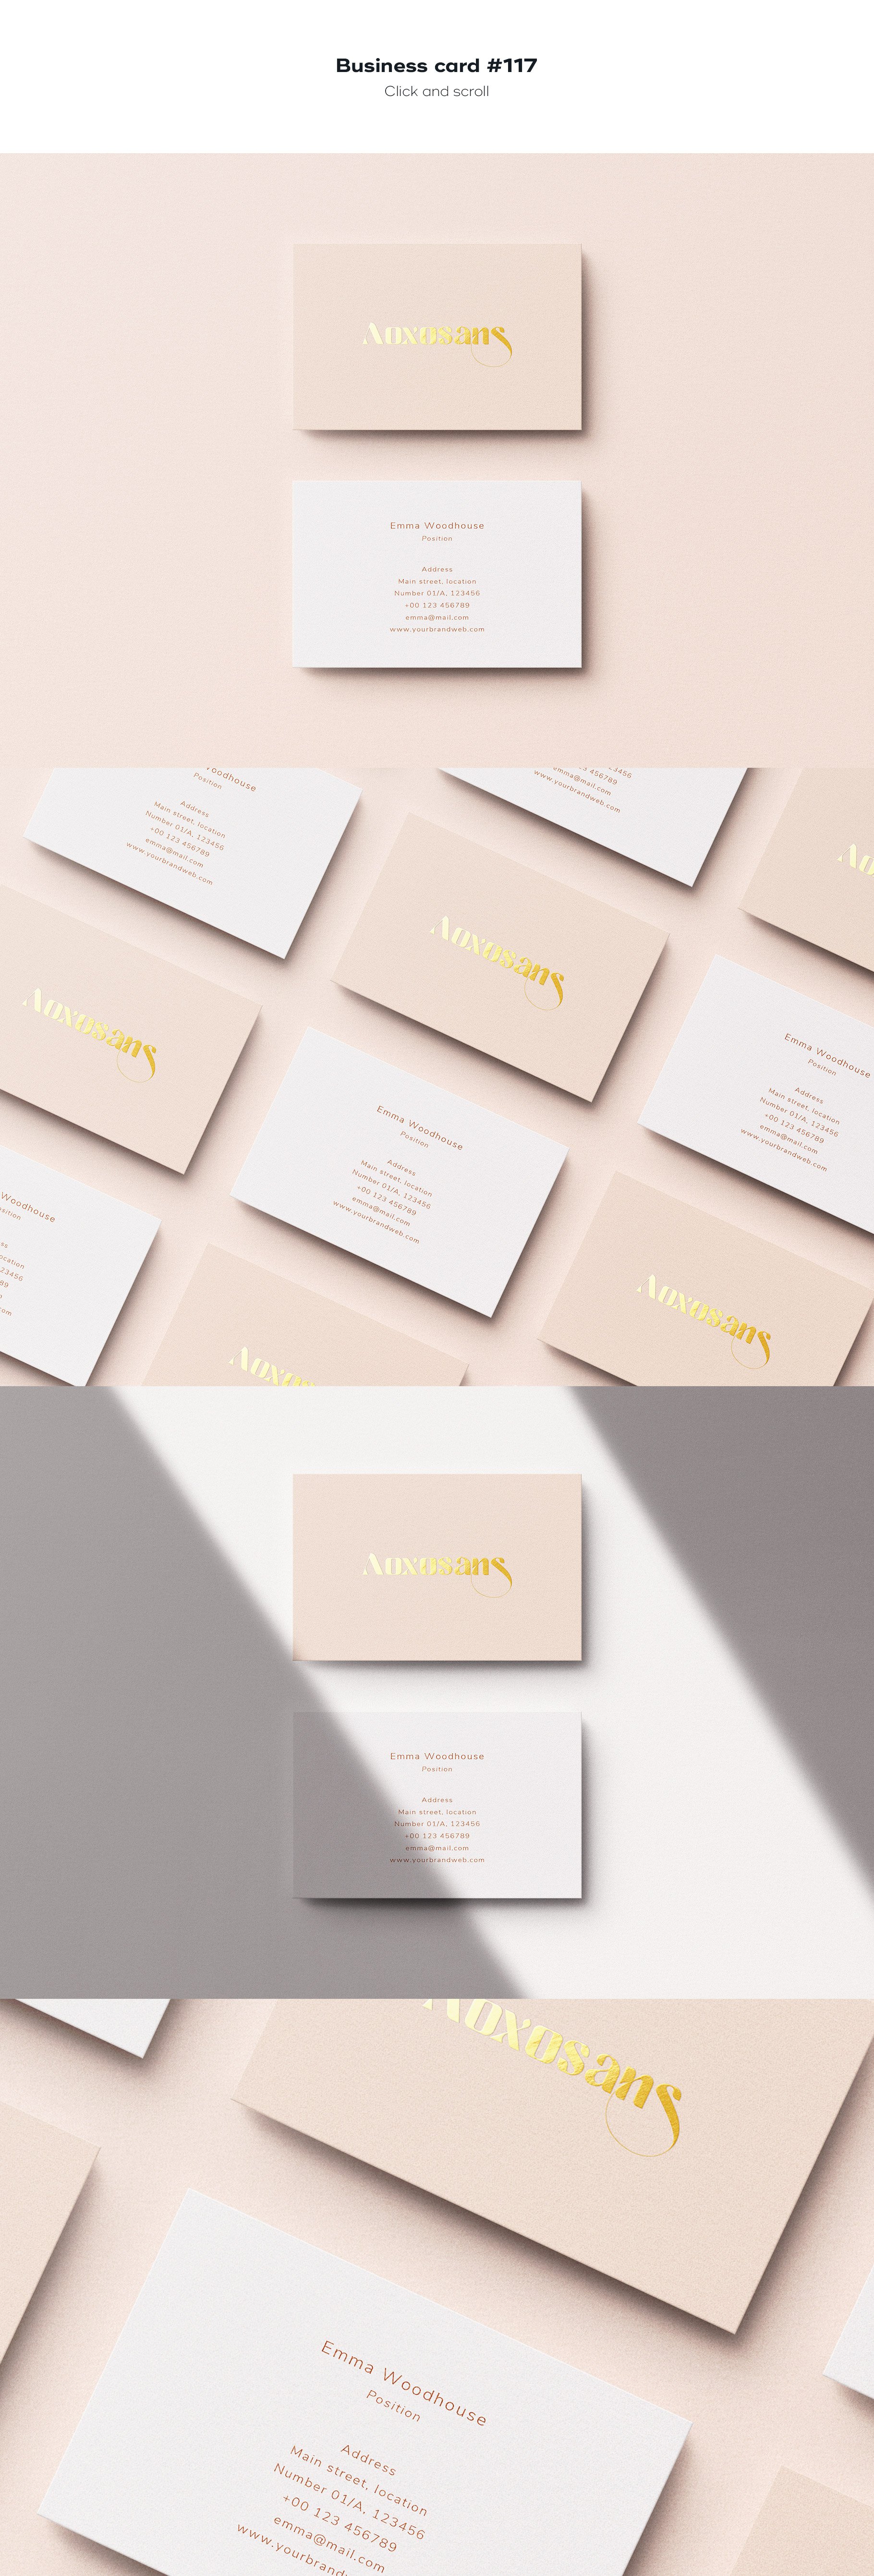 business card 117 843